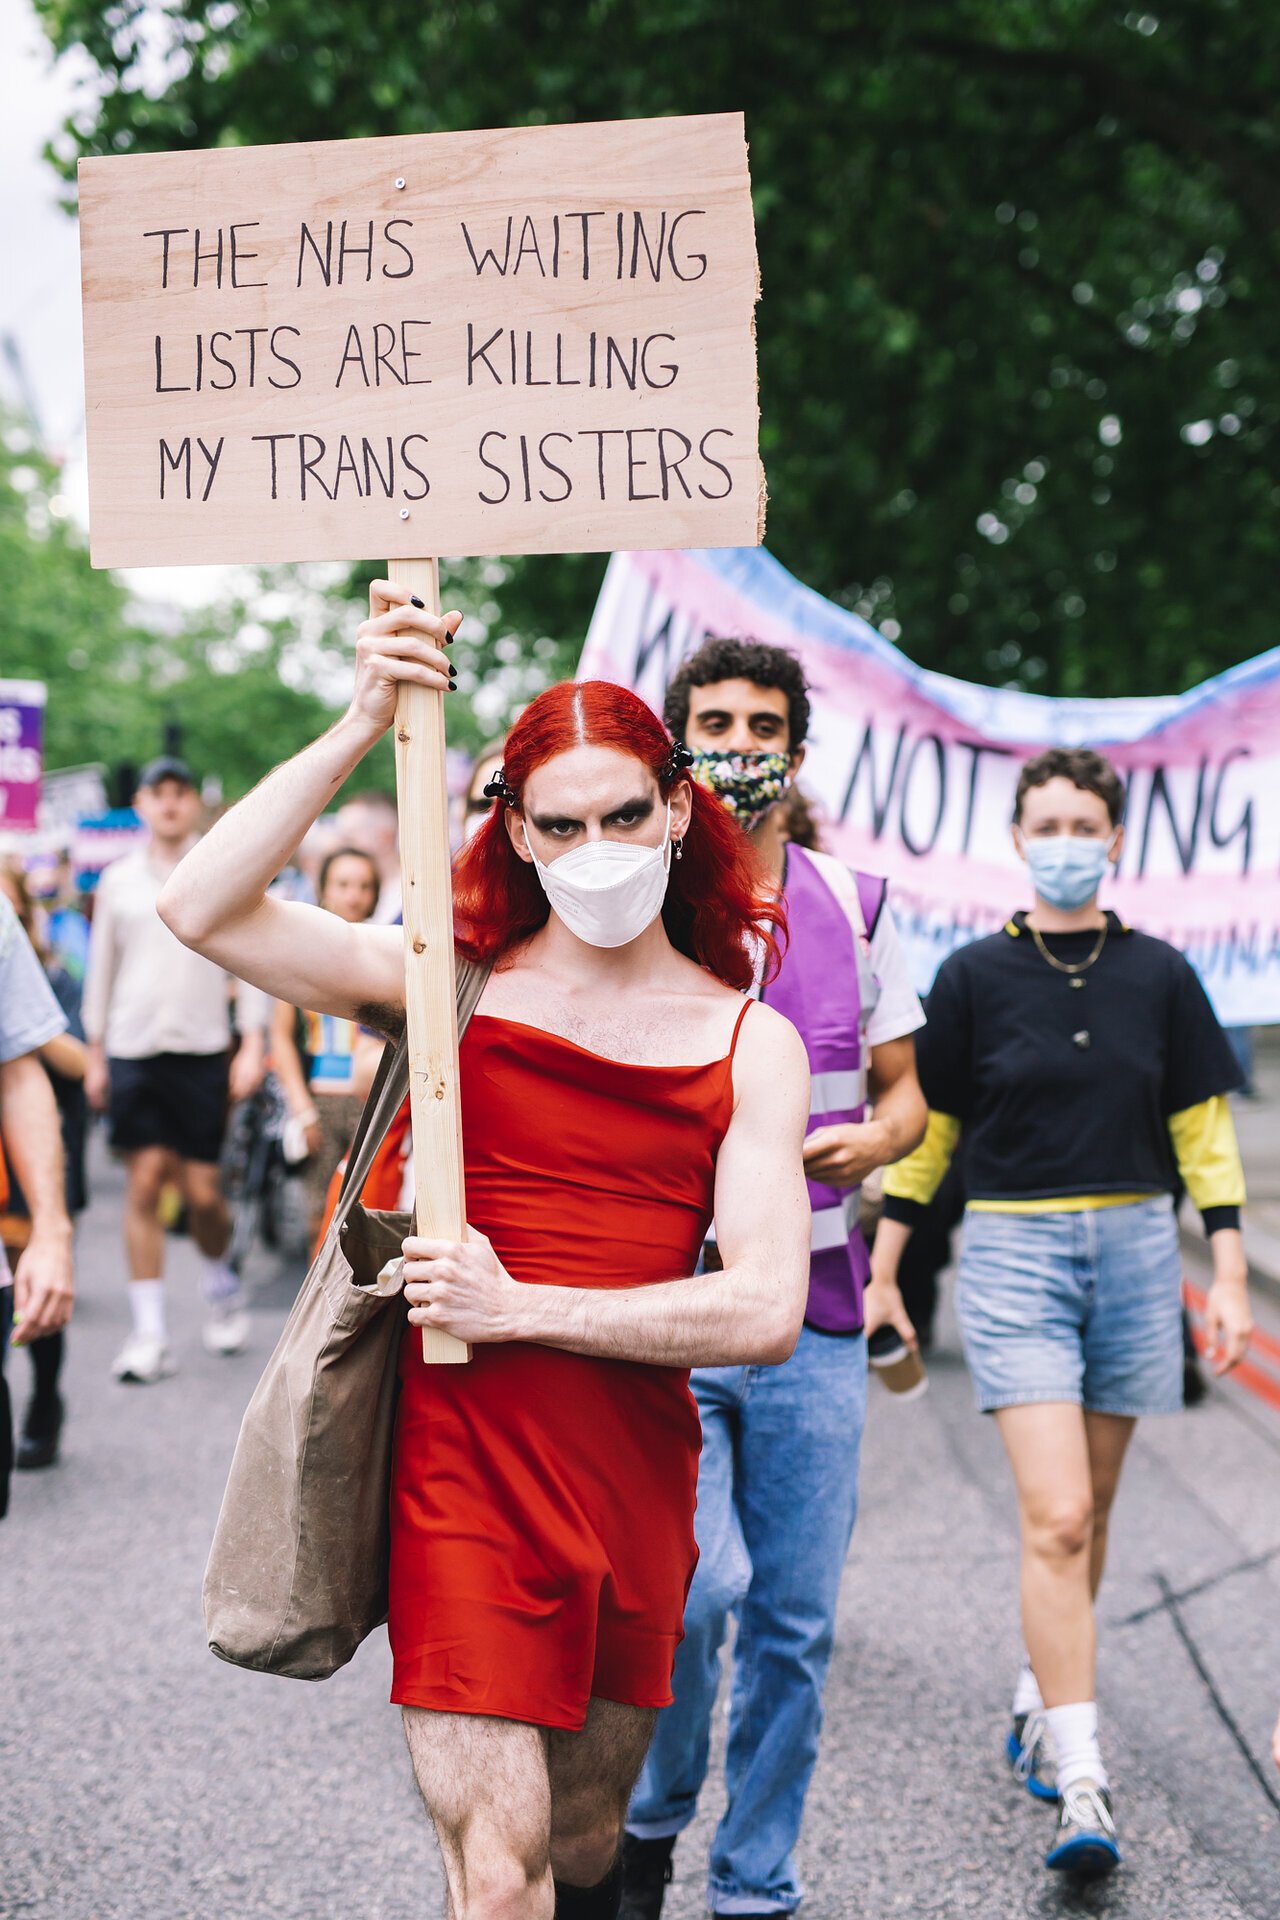 TransActual a person in a short red dress, wearing a facemask and carry a sign that reads "The NHS waiting lists are killing my trans sisters" as part of the London Trans Pride parade